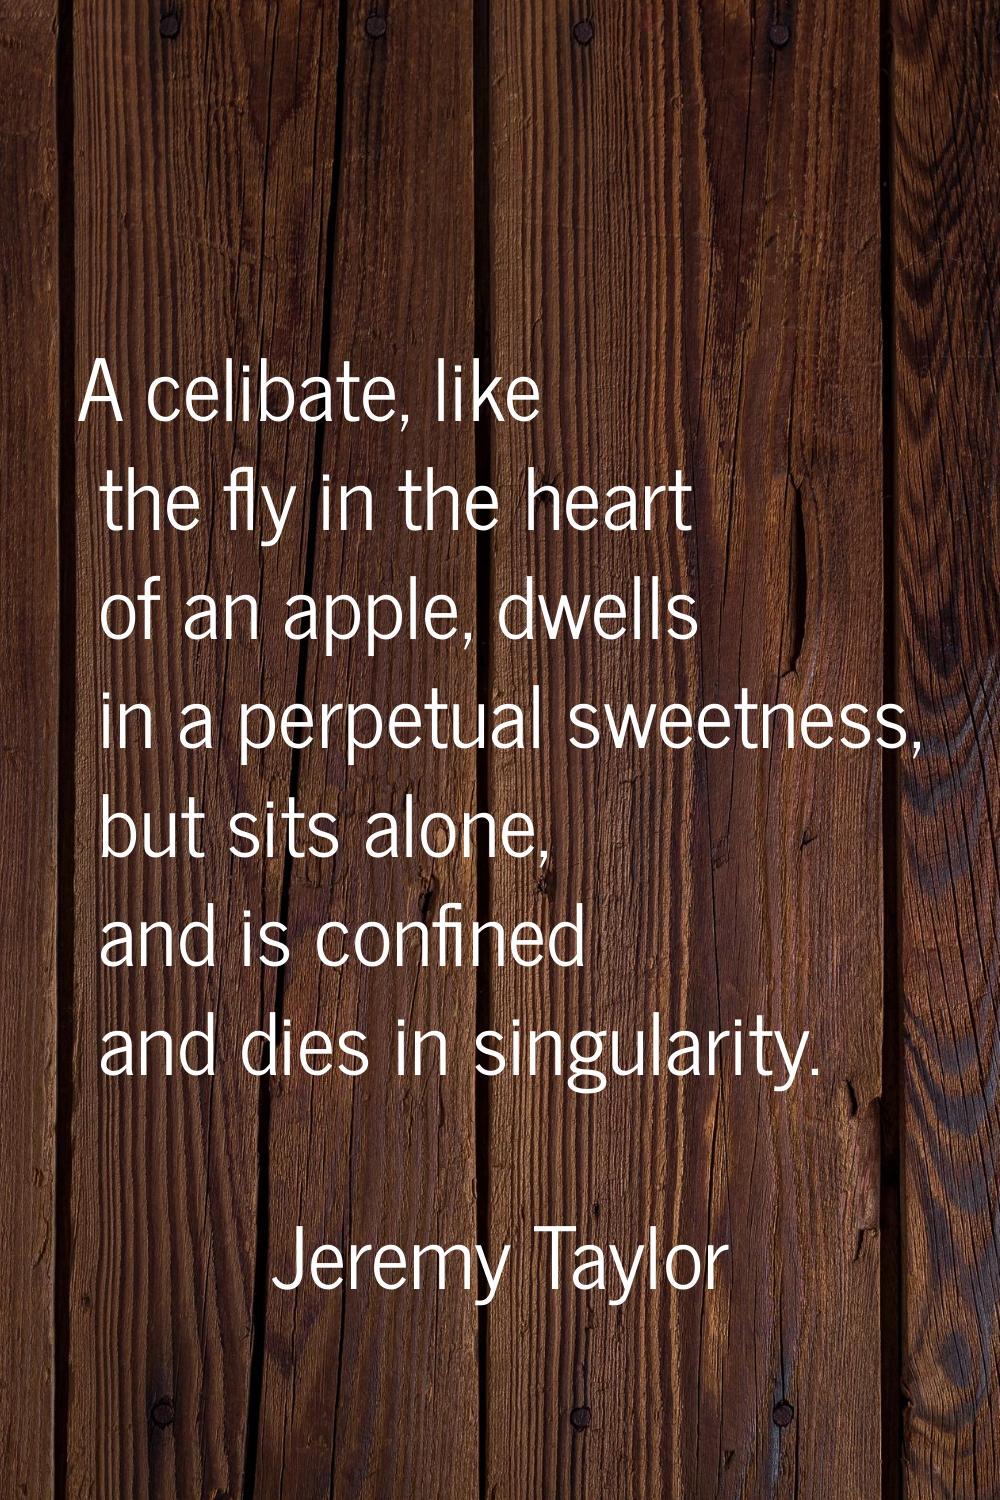 A celibate, like the fly in the heart of an apple, dwells in a perpetual sweetness, but sits alone,